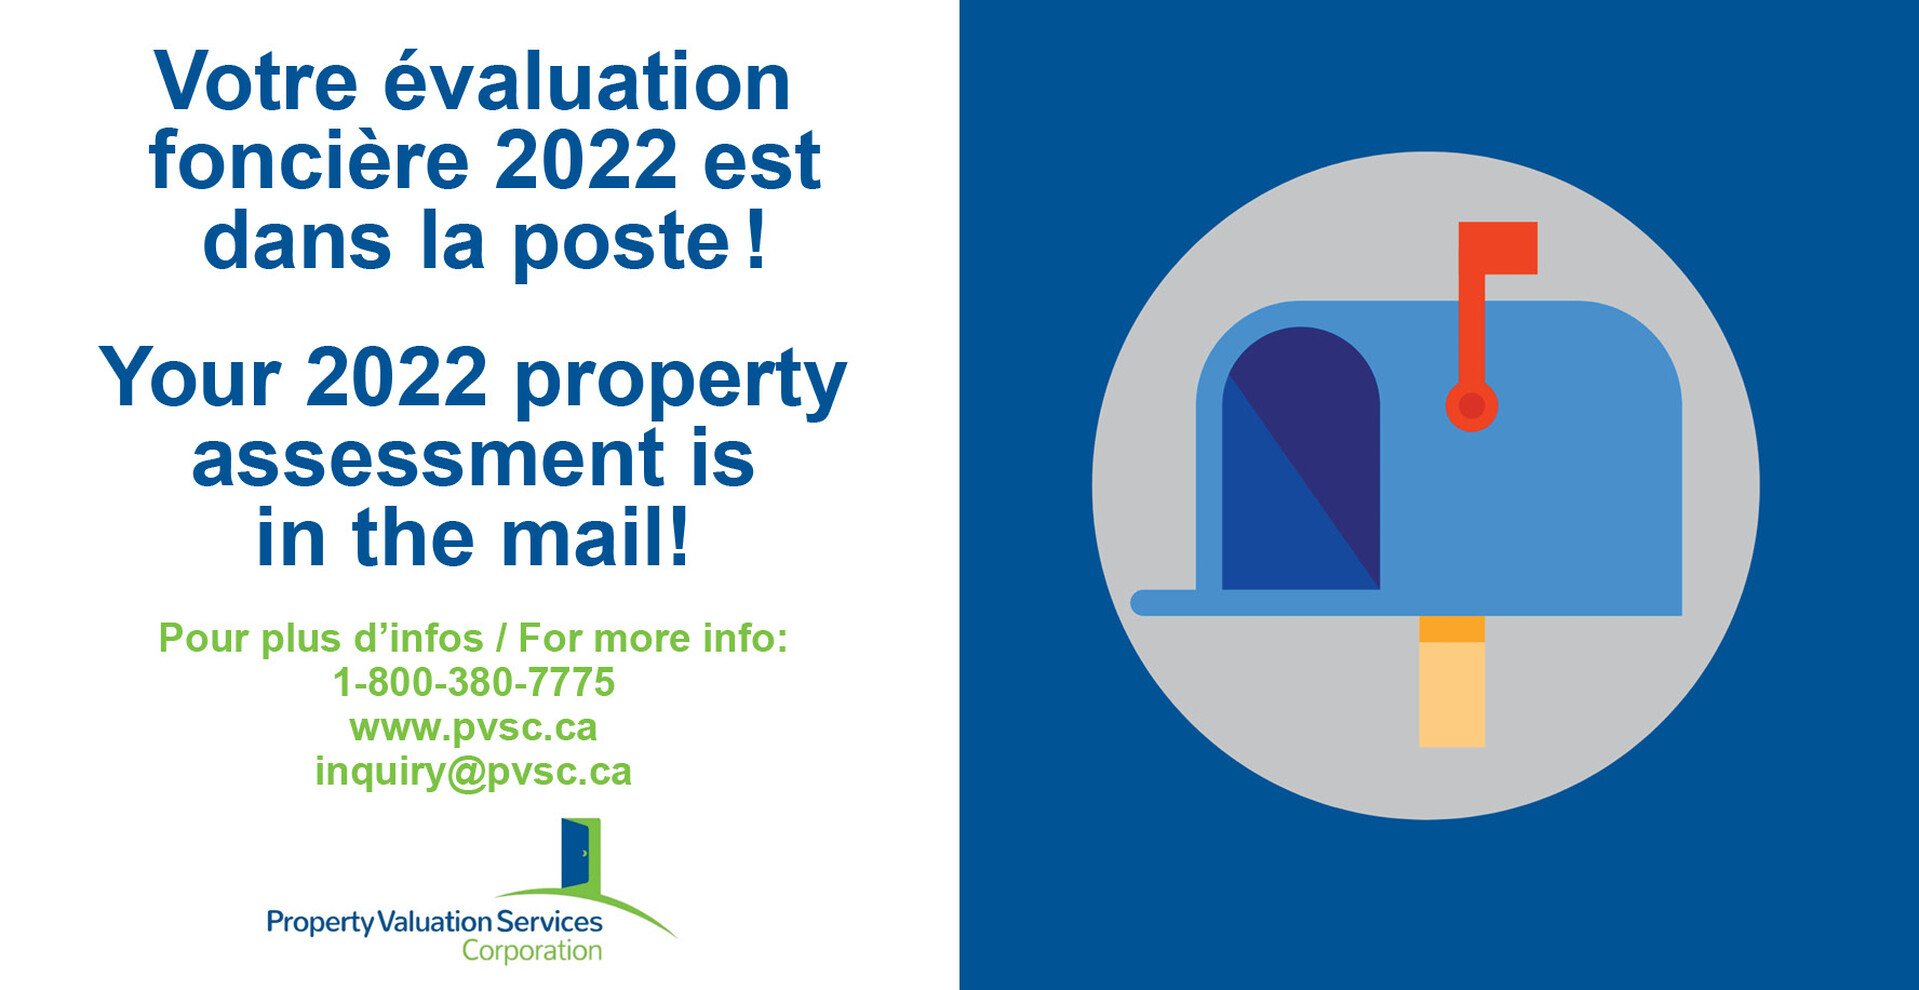 2022 property assessments now online and in the mail